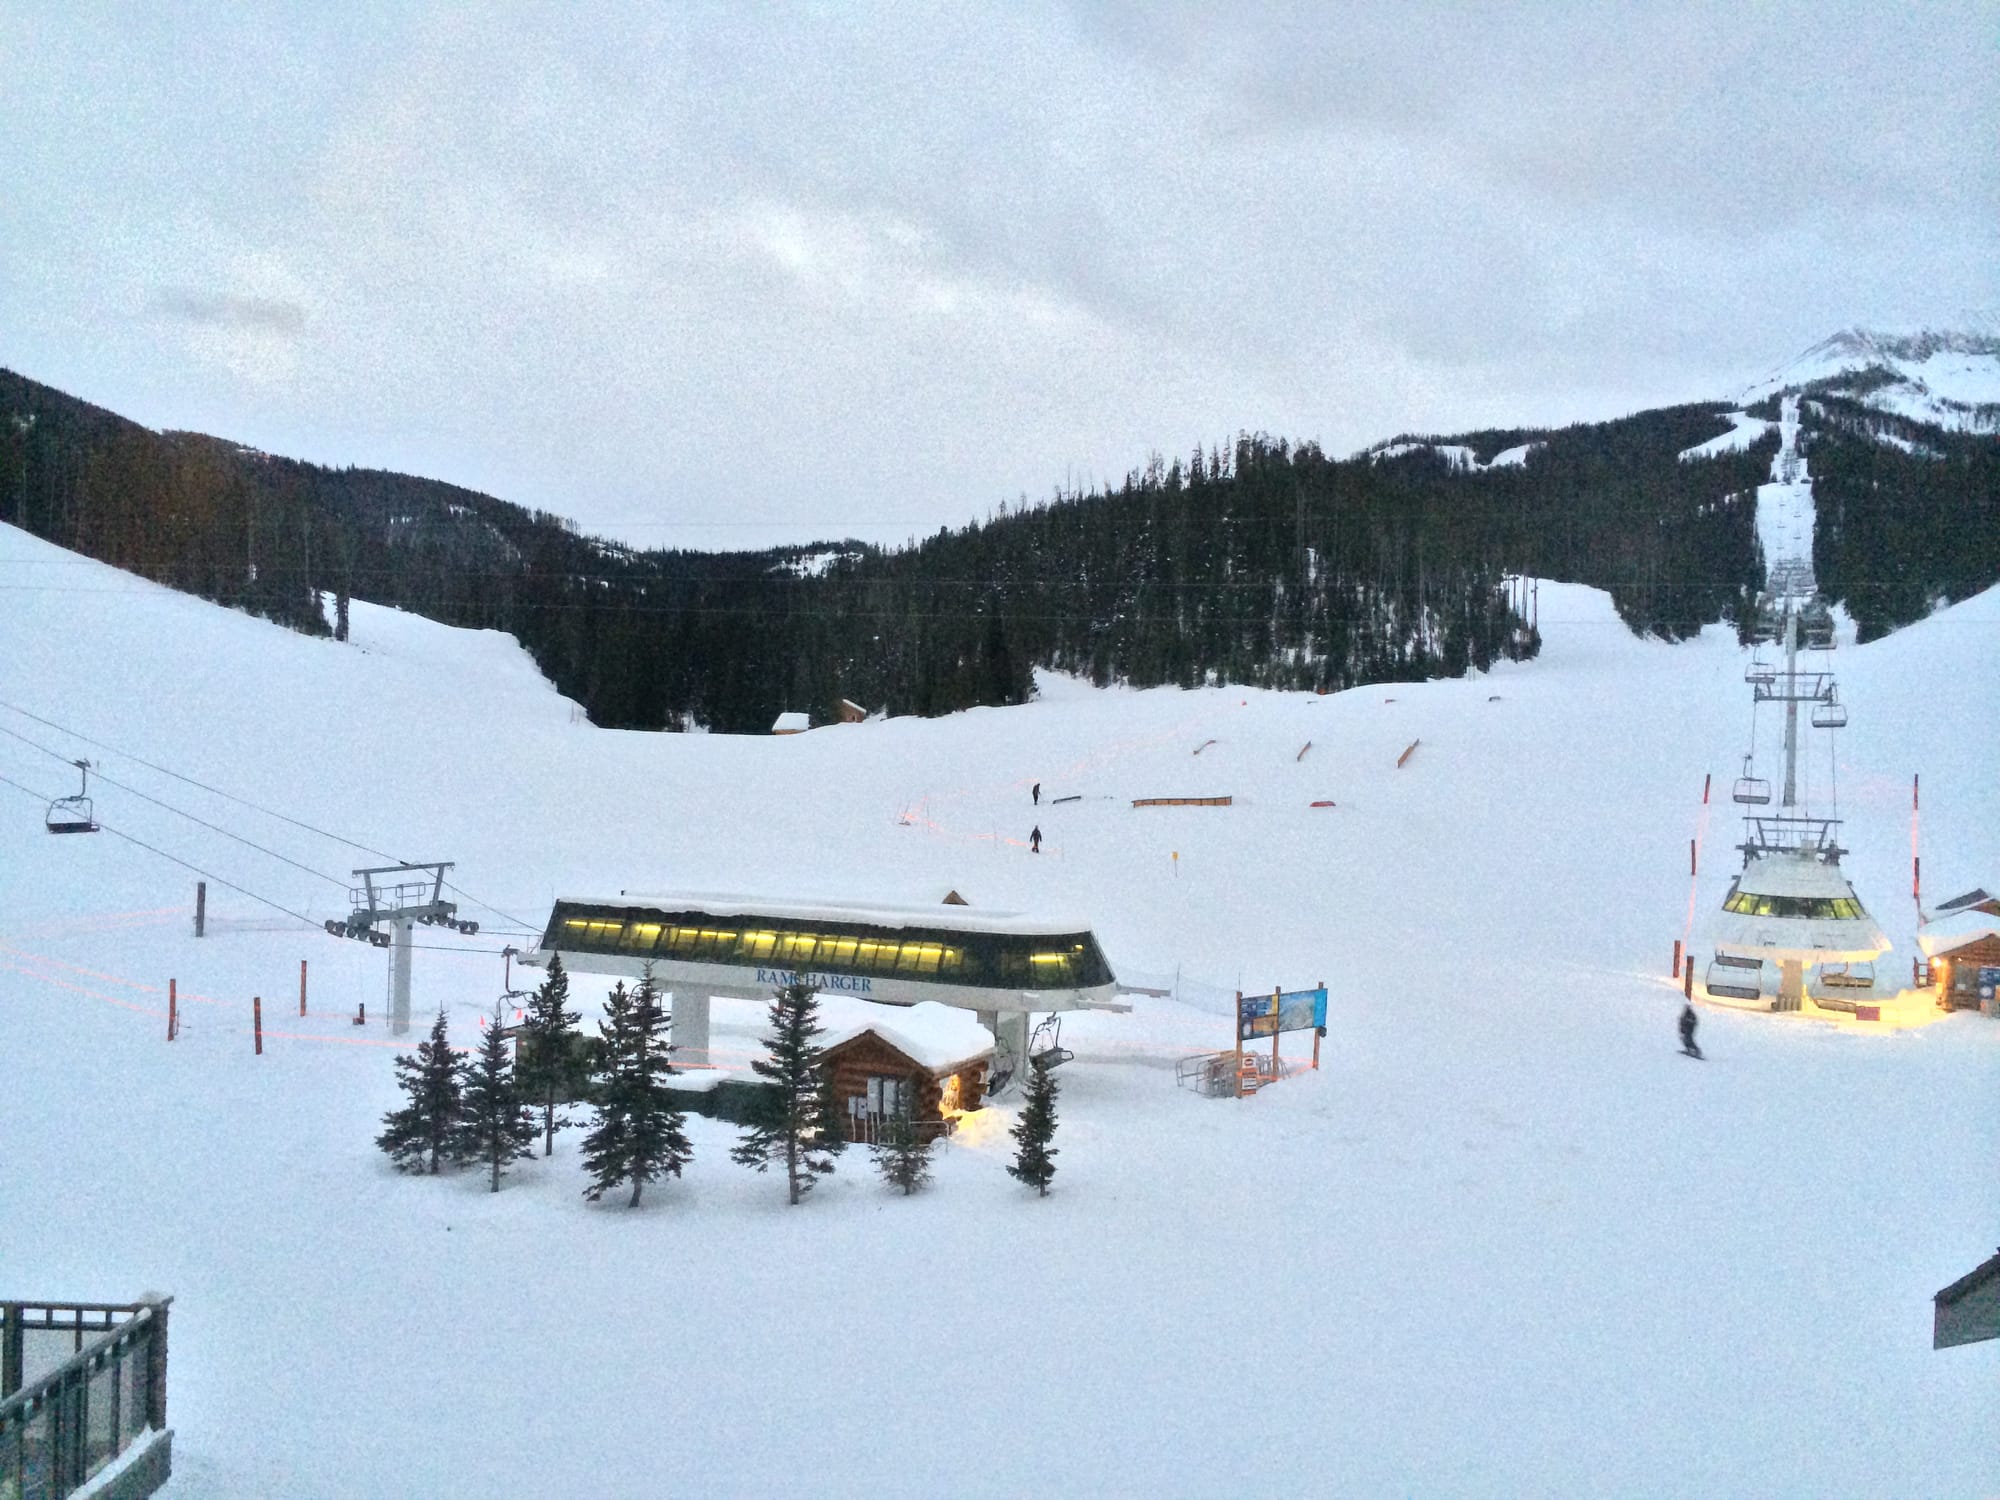 Photo by Author — lifts from the Summit Hotel, Big Sky, Montana